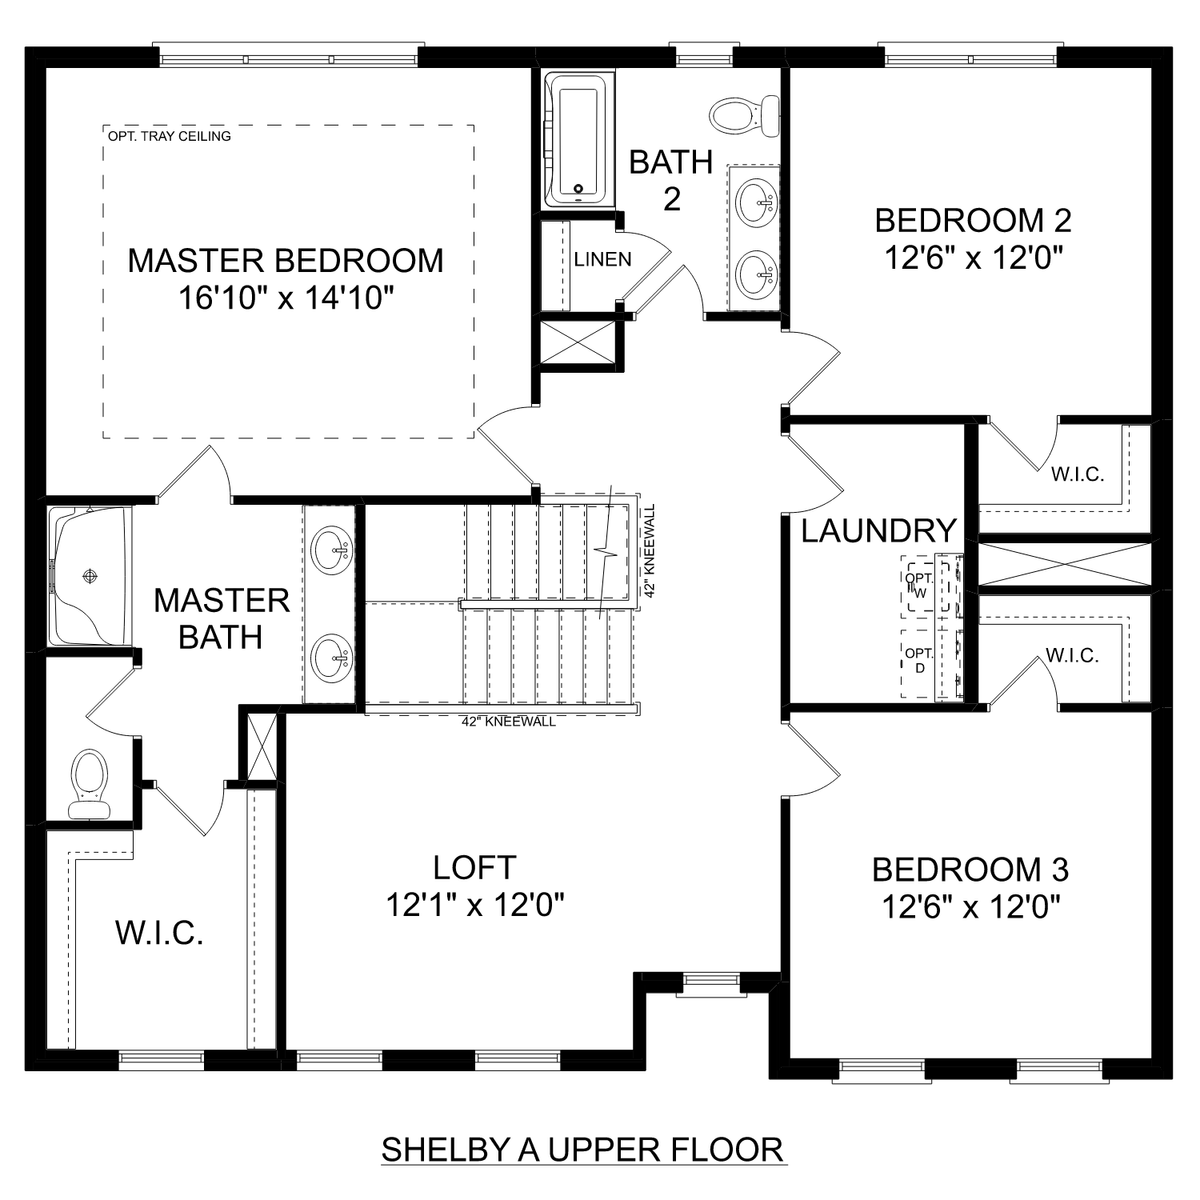 2 - The Shelby floor plan layout for 115 Wilcot Road in Davidson Homes' Walker's Hill community.